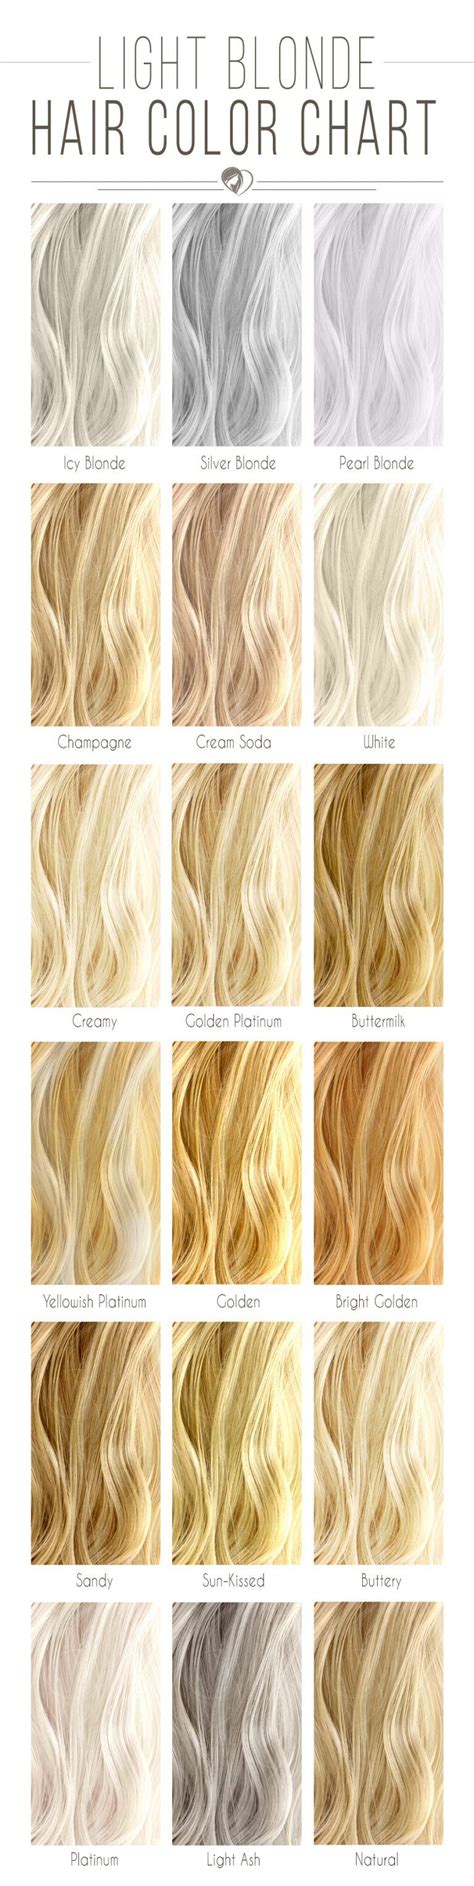 Blonde Hair Color Chart To Find The Right Shade For You Hair Chart Light Blonde Hair Blonde